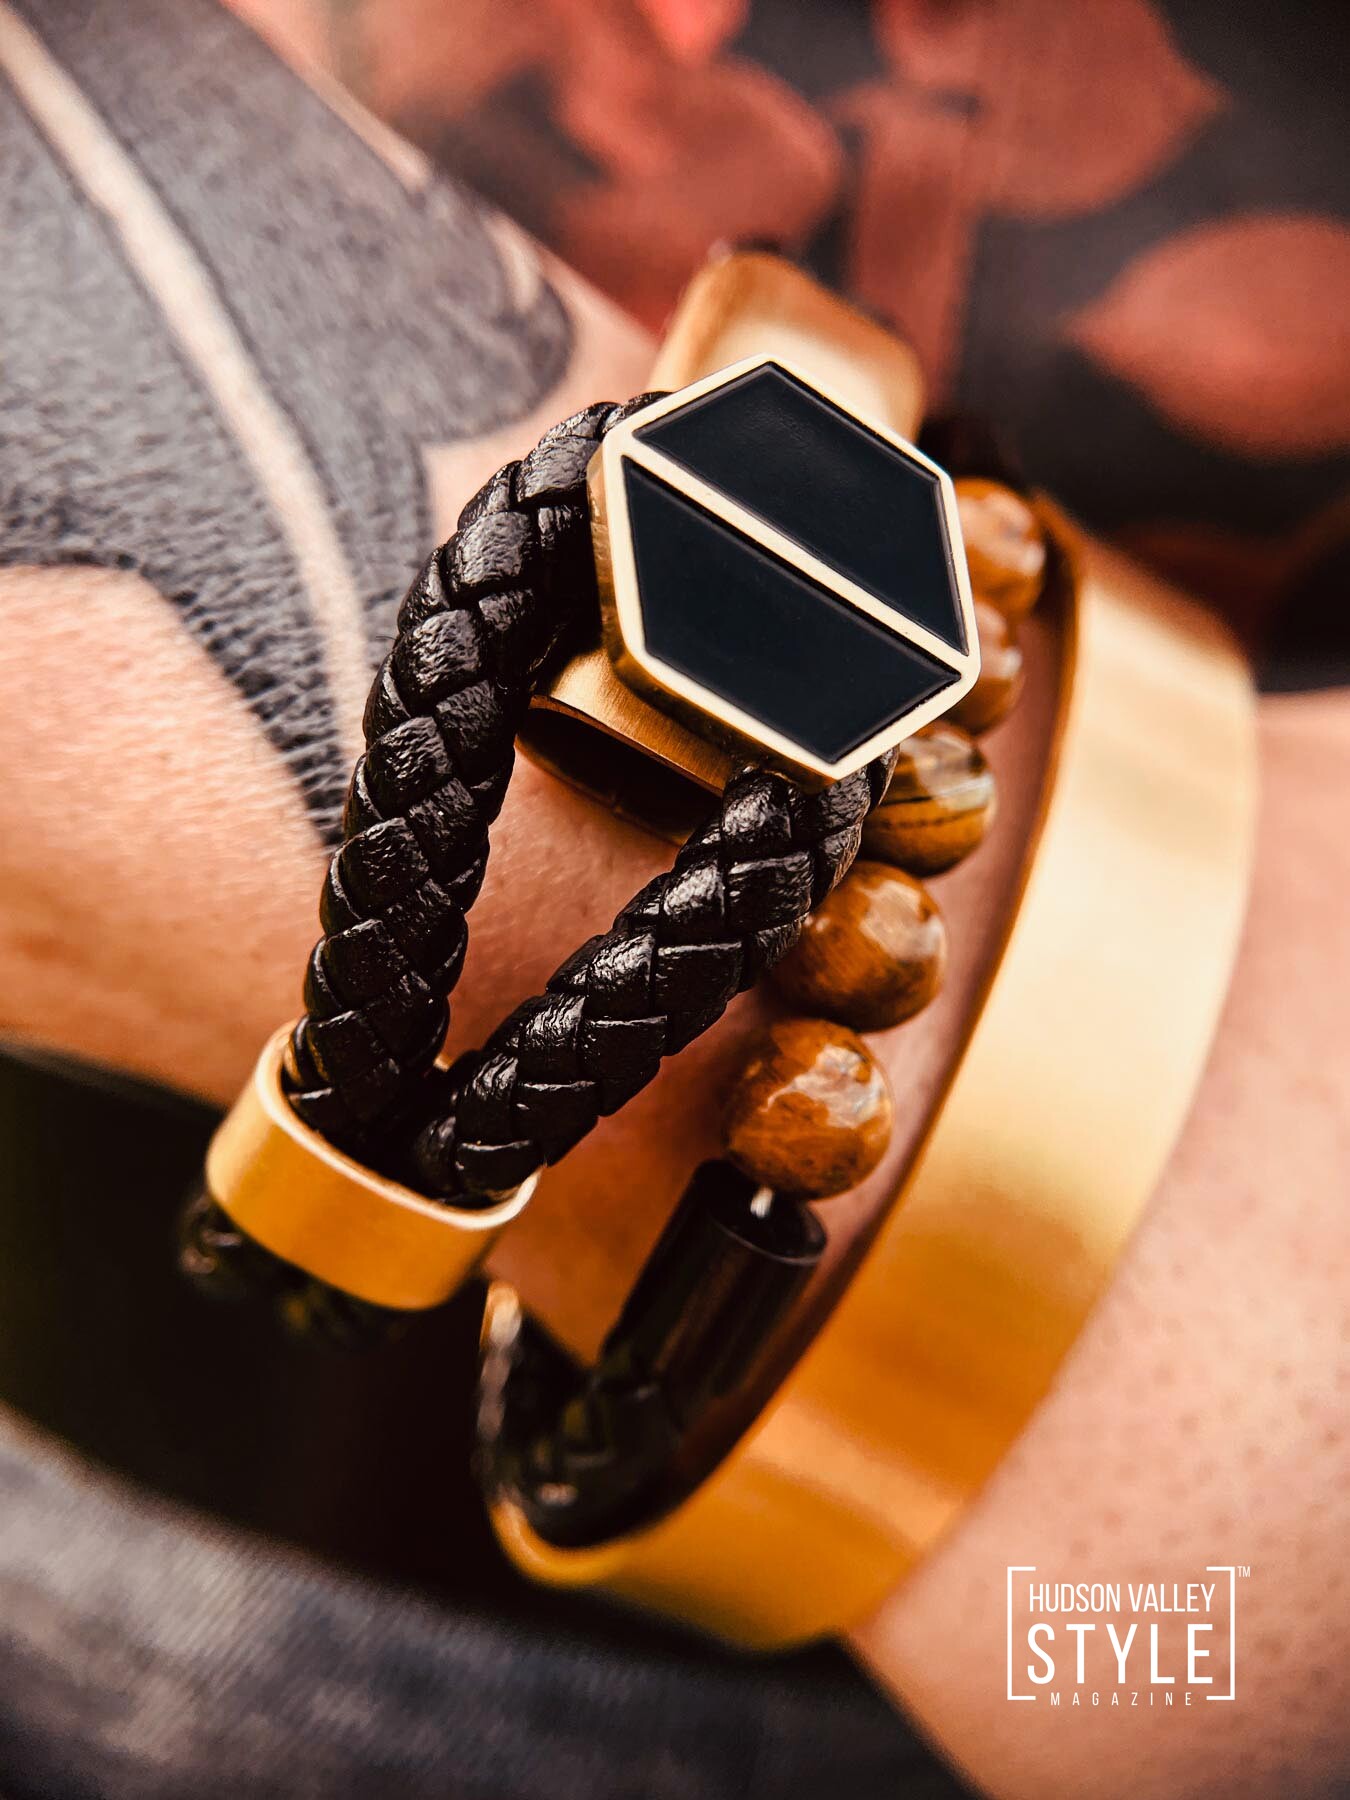 Top 5 Mens Fashion Accessories Spring 2021 Accessories For Men Presented By Hard New York 